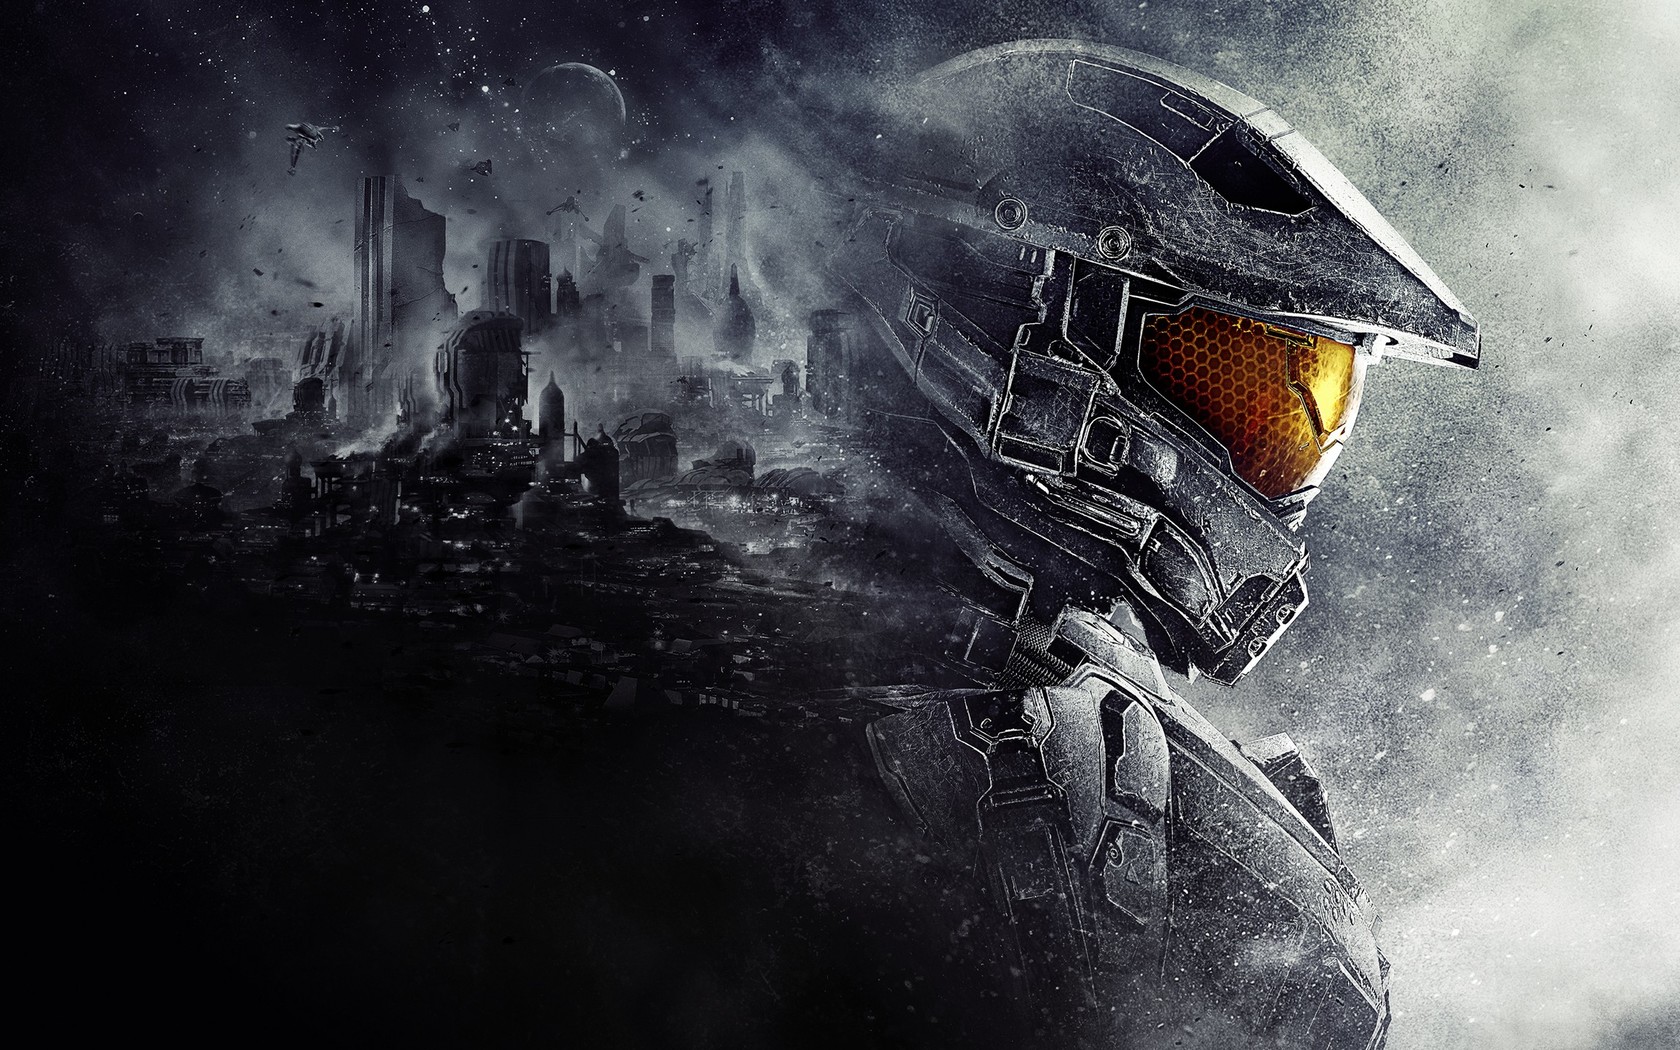 Halo 5 Master Chief Wallpaper For Android On High Resolution - Halo Hd Wallpapers 1080p - HD Wallpaper 